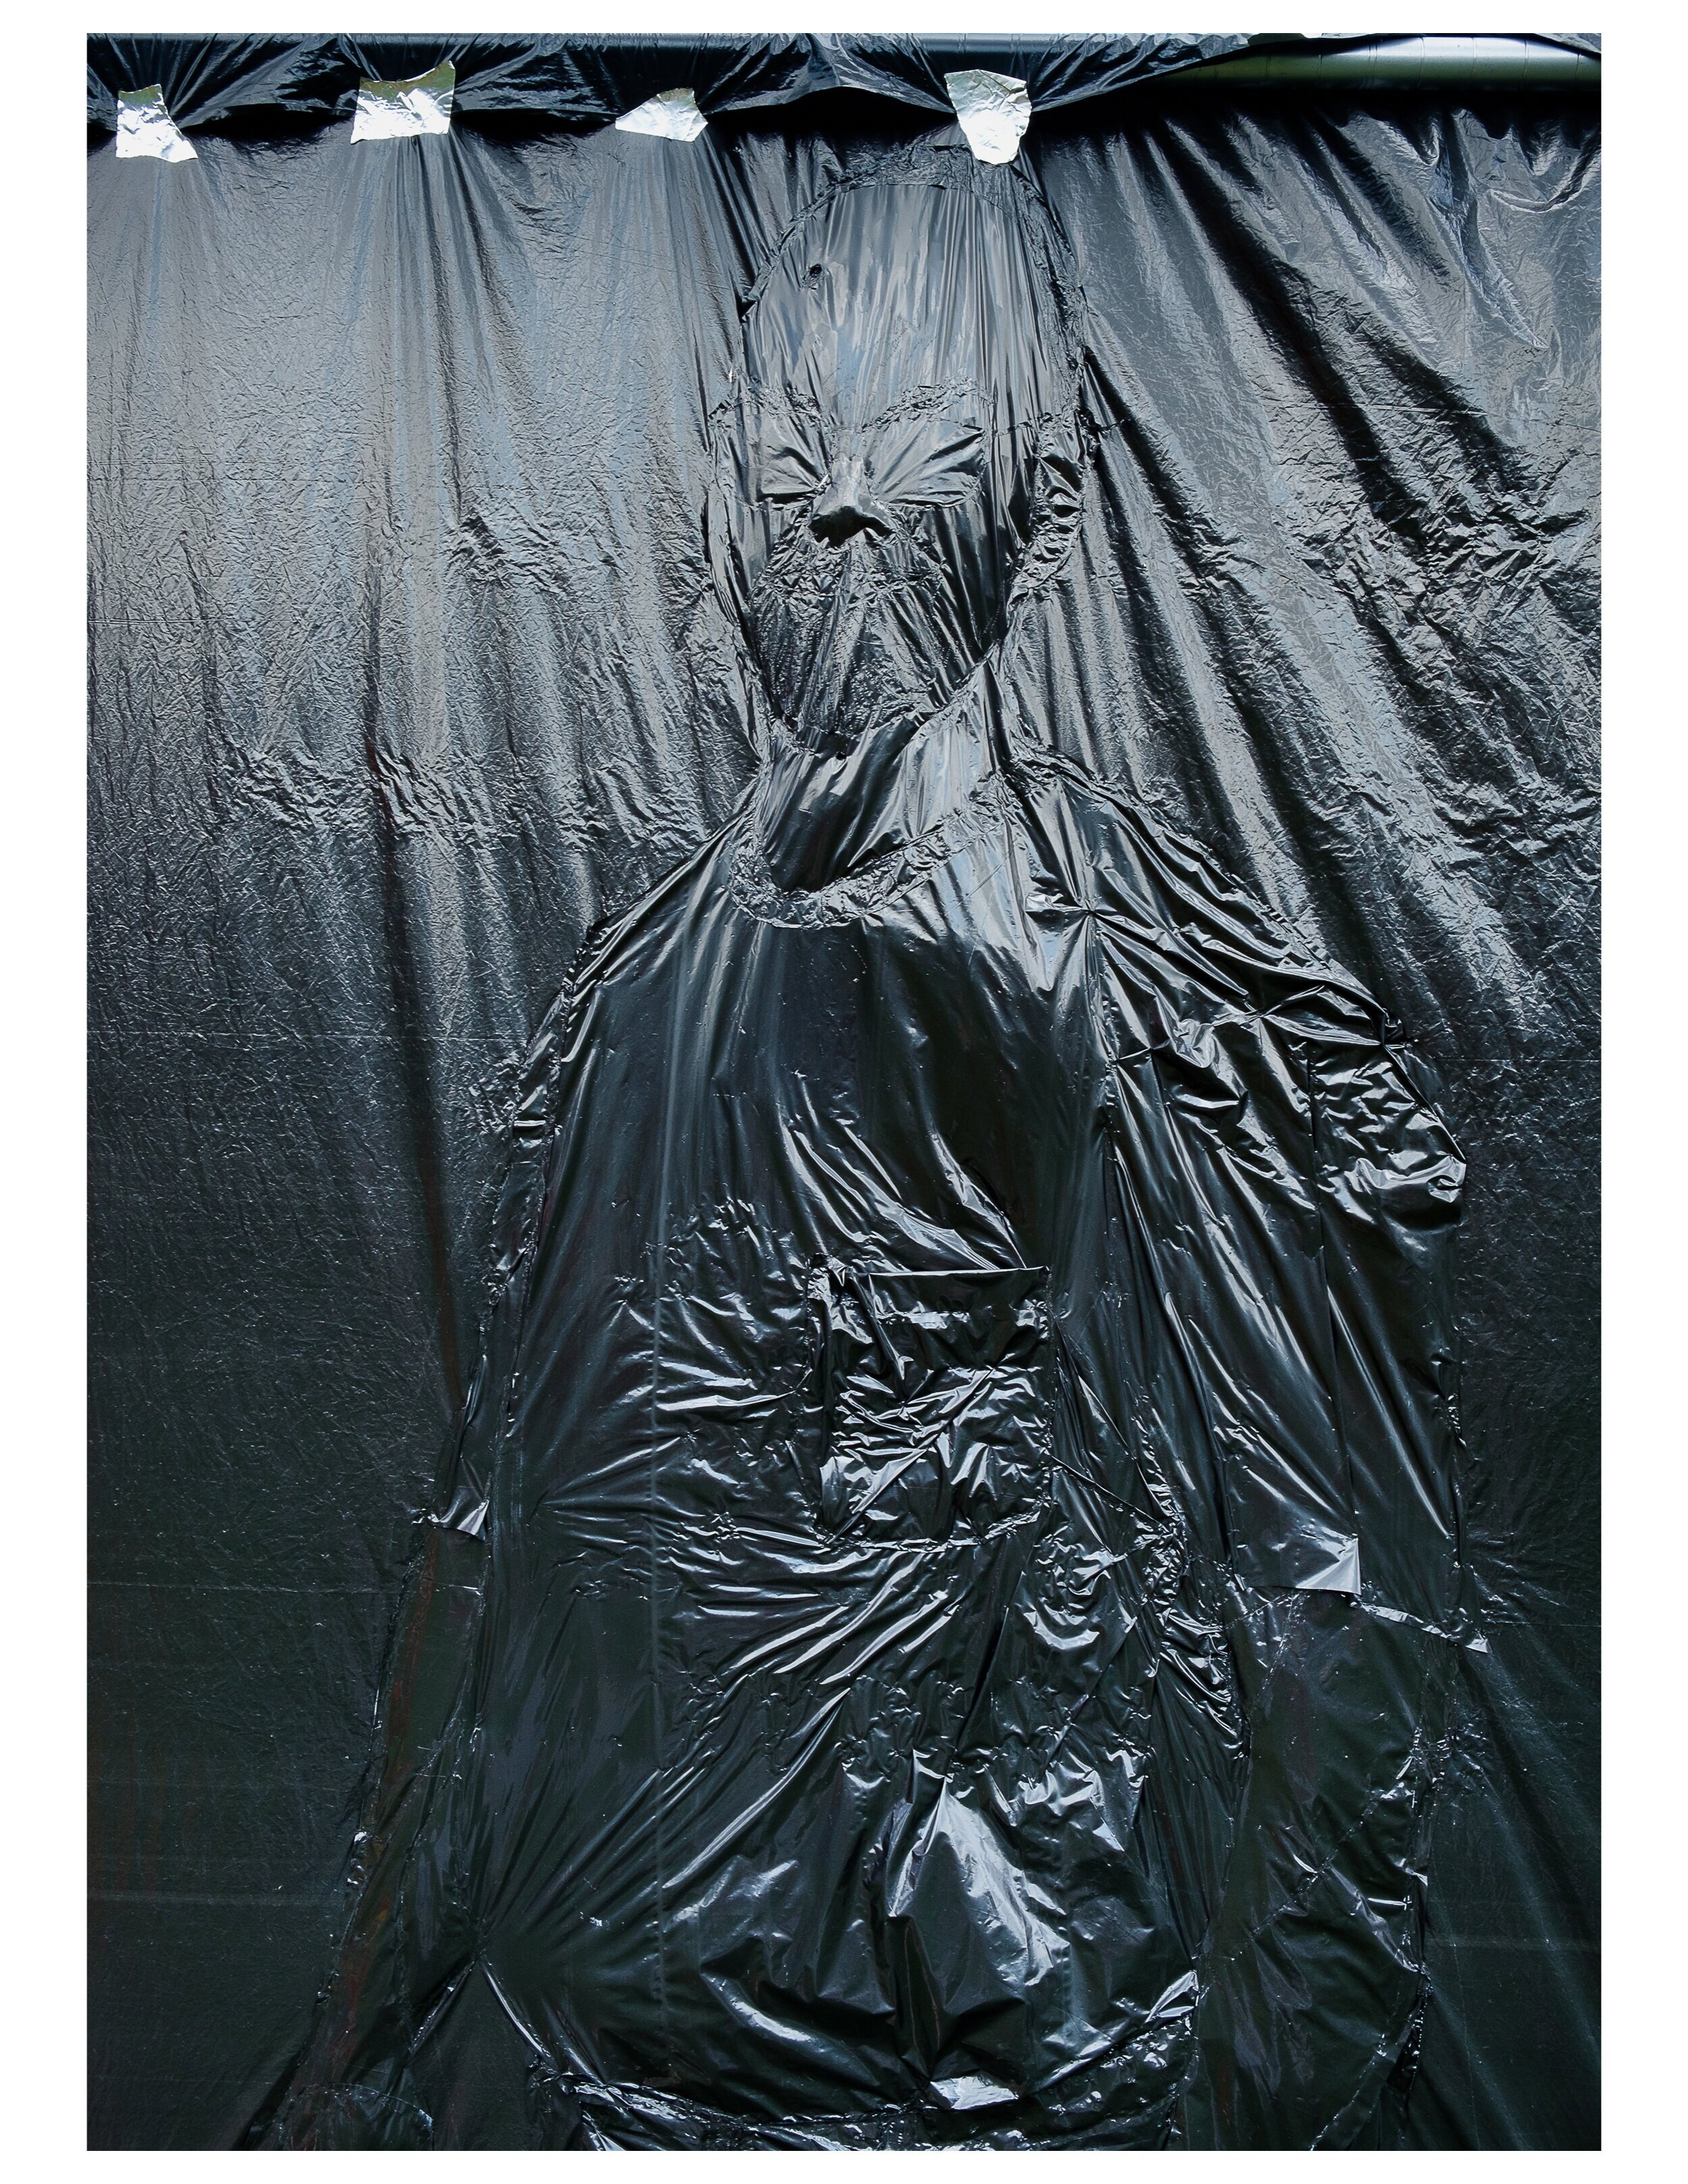  Colored Trash Bags and Ready-made  7’ X 4’  2021 